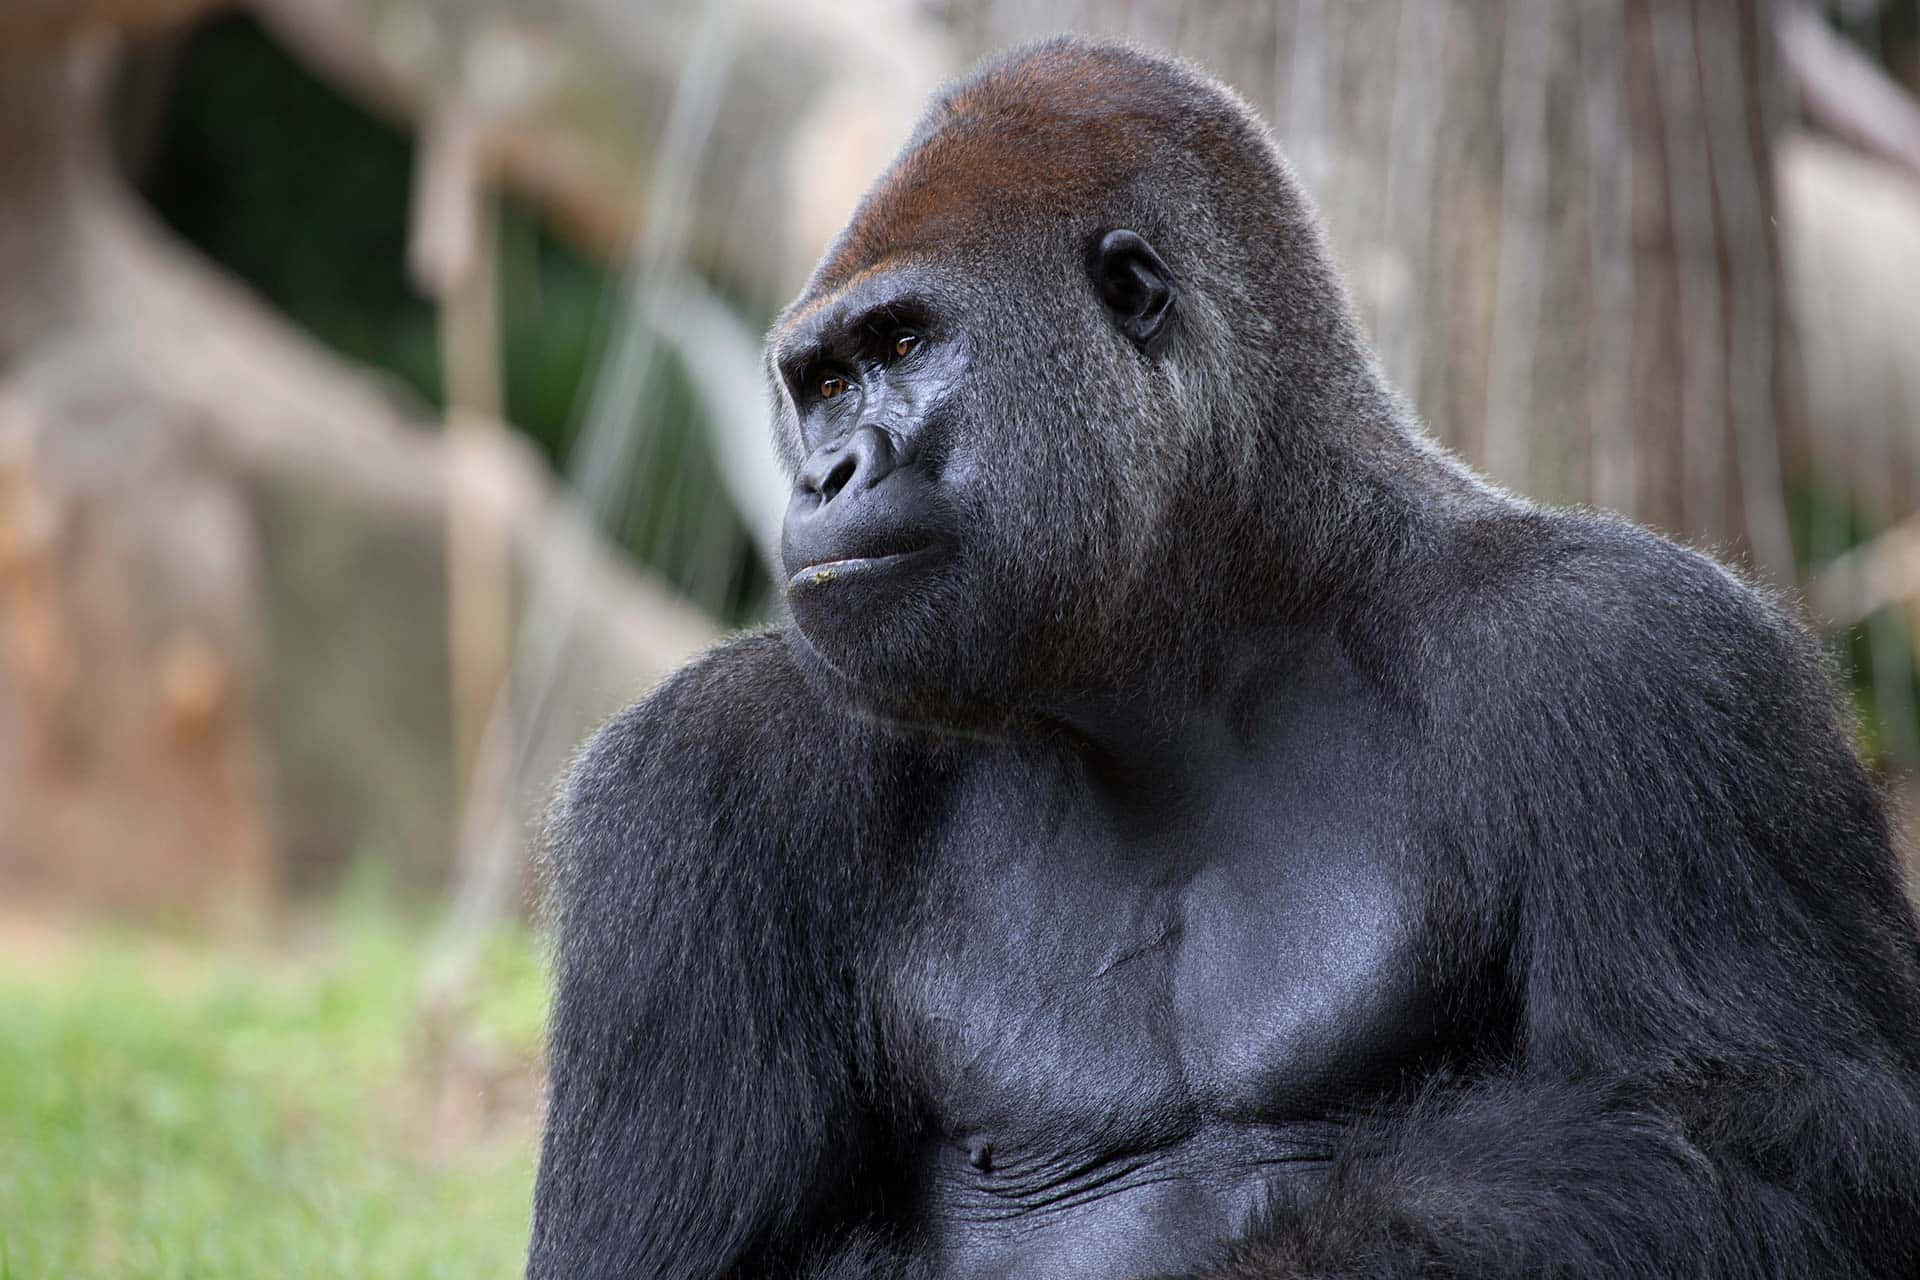 An adorable Gorilla looks longingly into the camera